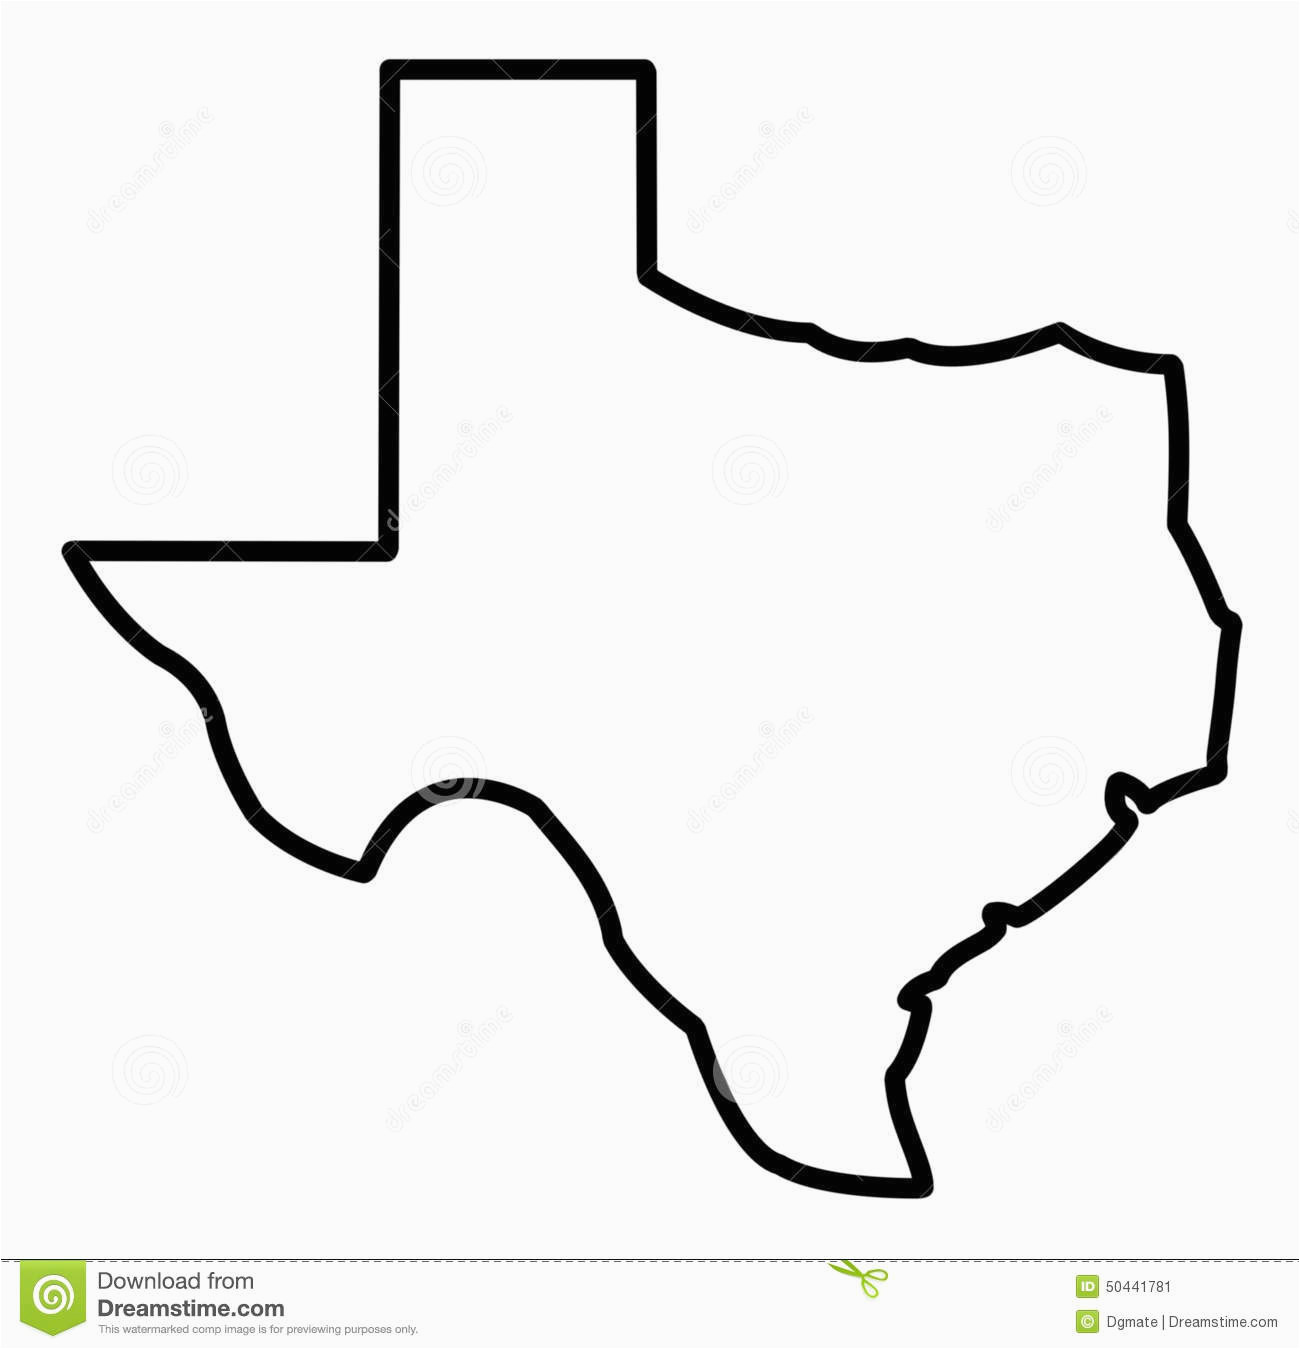 map of texas black and white sitedesignco net